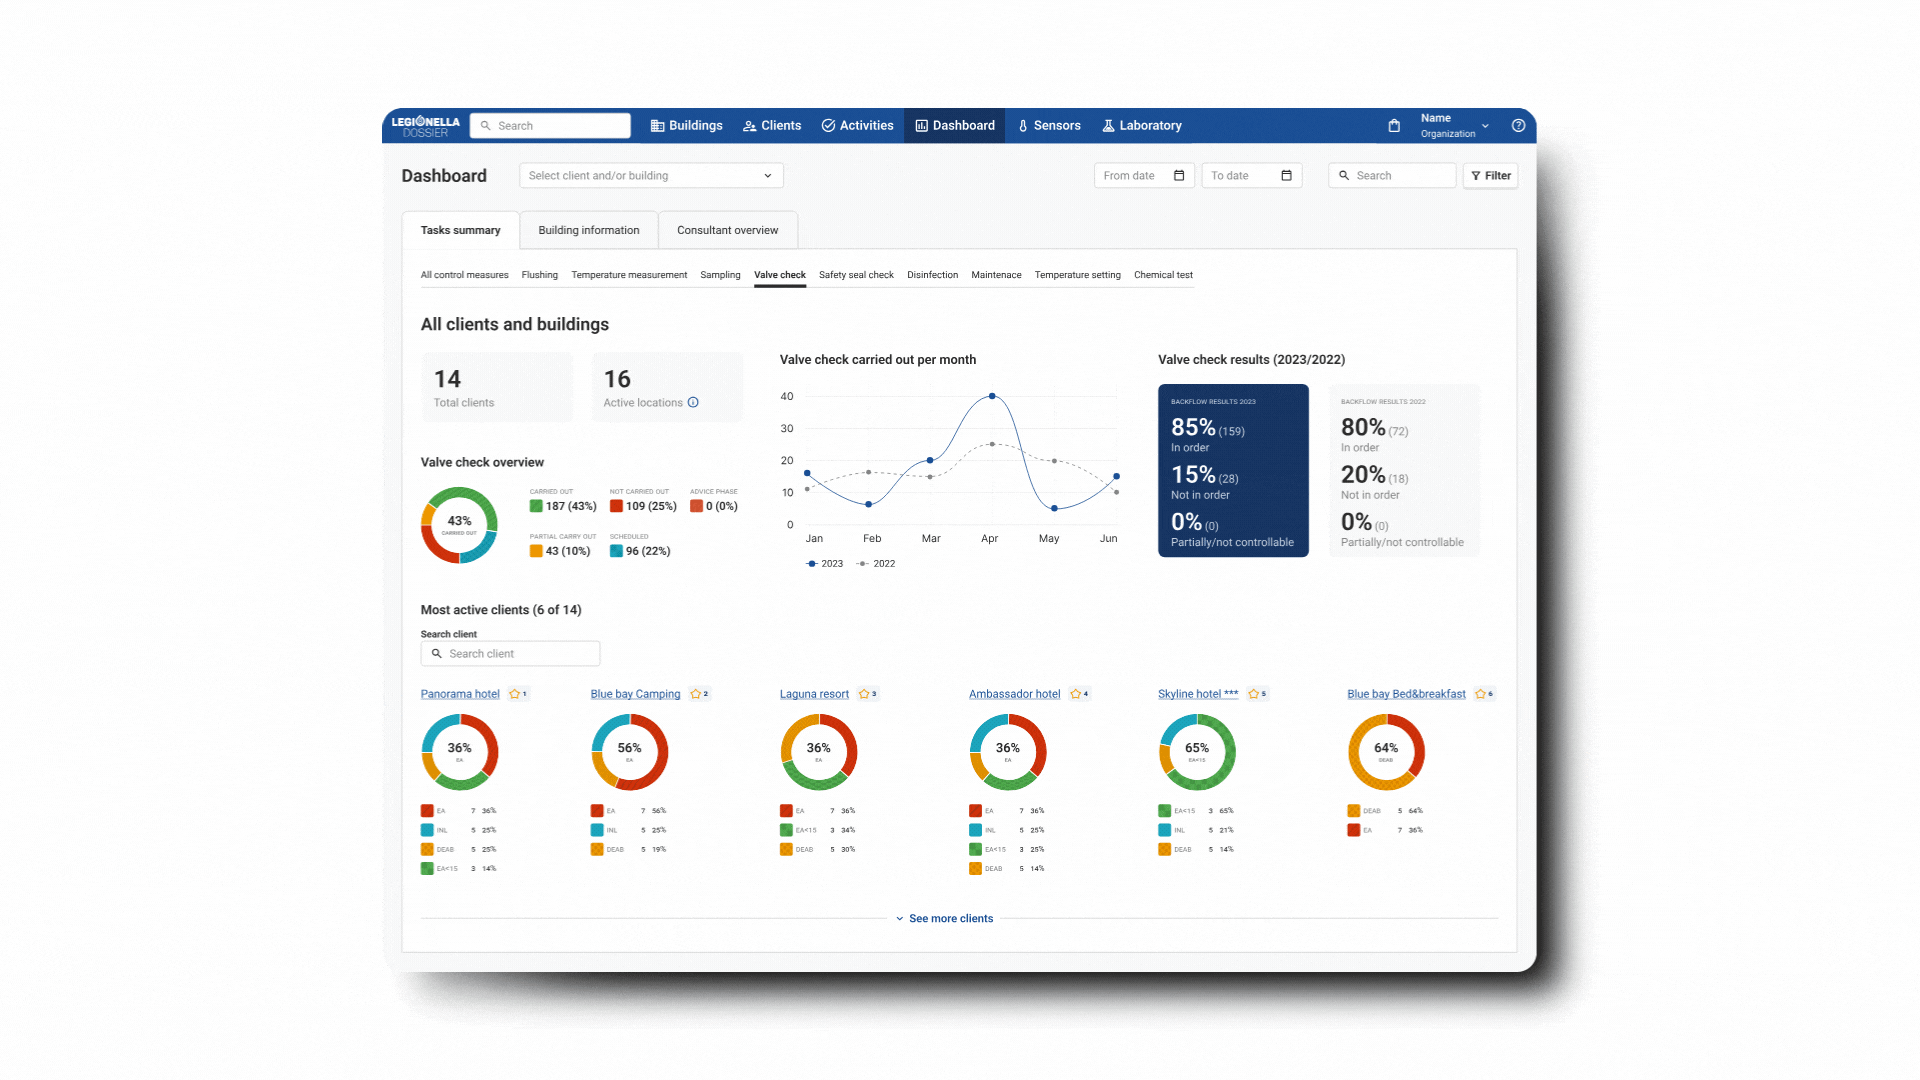 New dashboards LD 1.3 release (1)